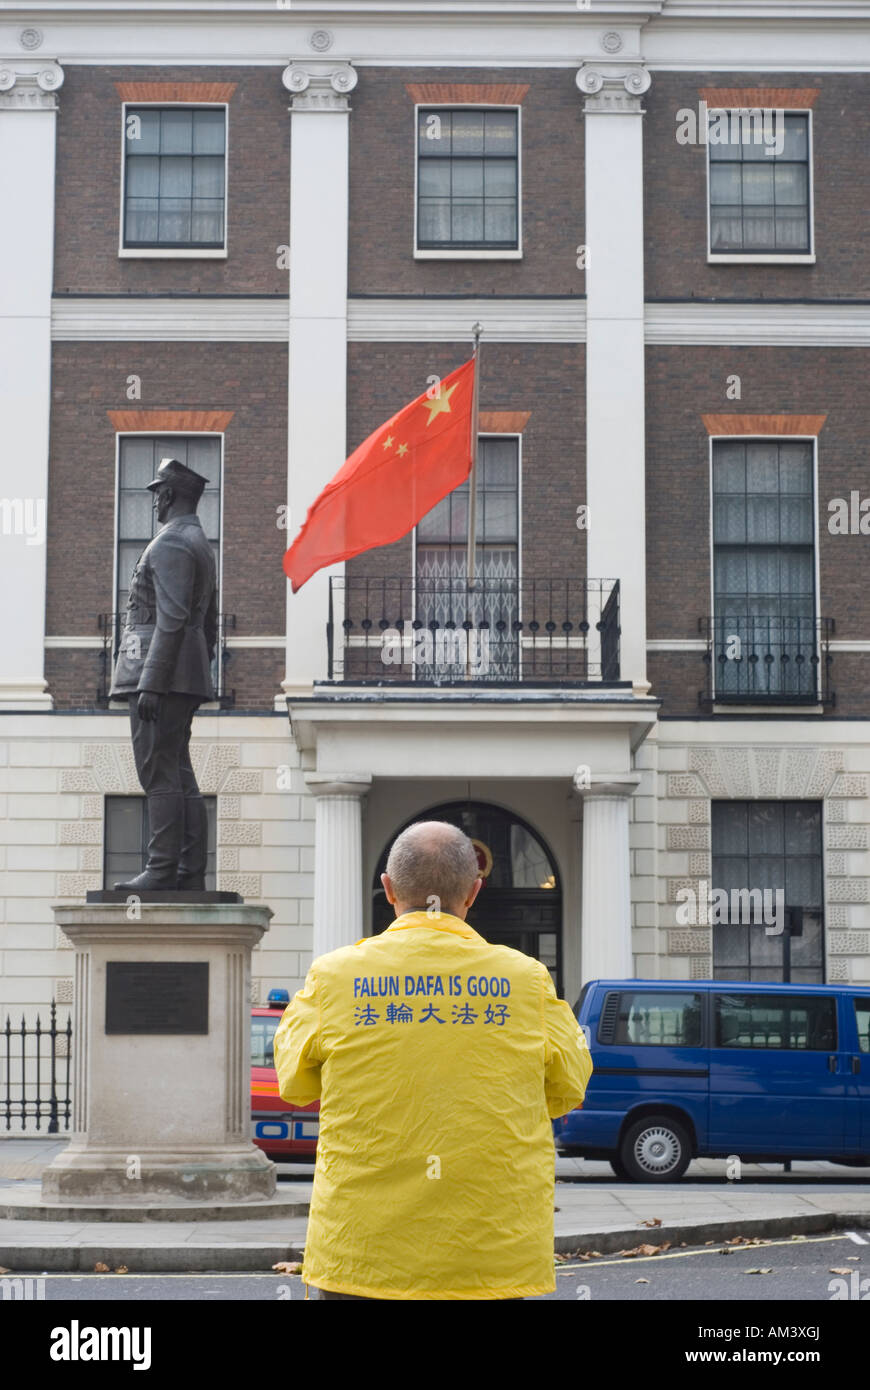 Falun Dafa is Good caption on back of lonely demonstrator outside Chinese embassy in London Stock Photo